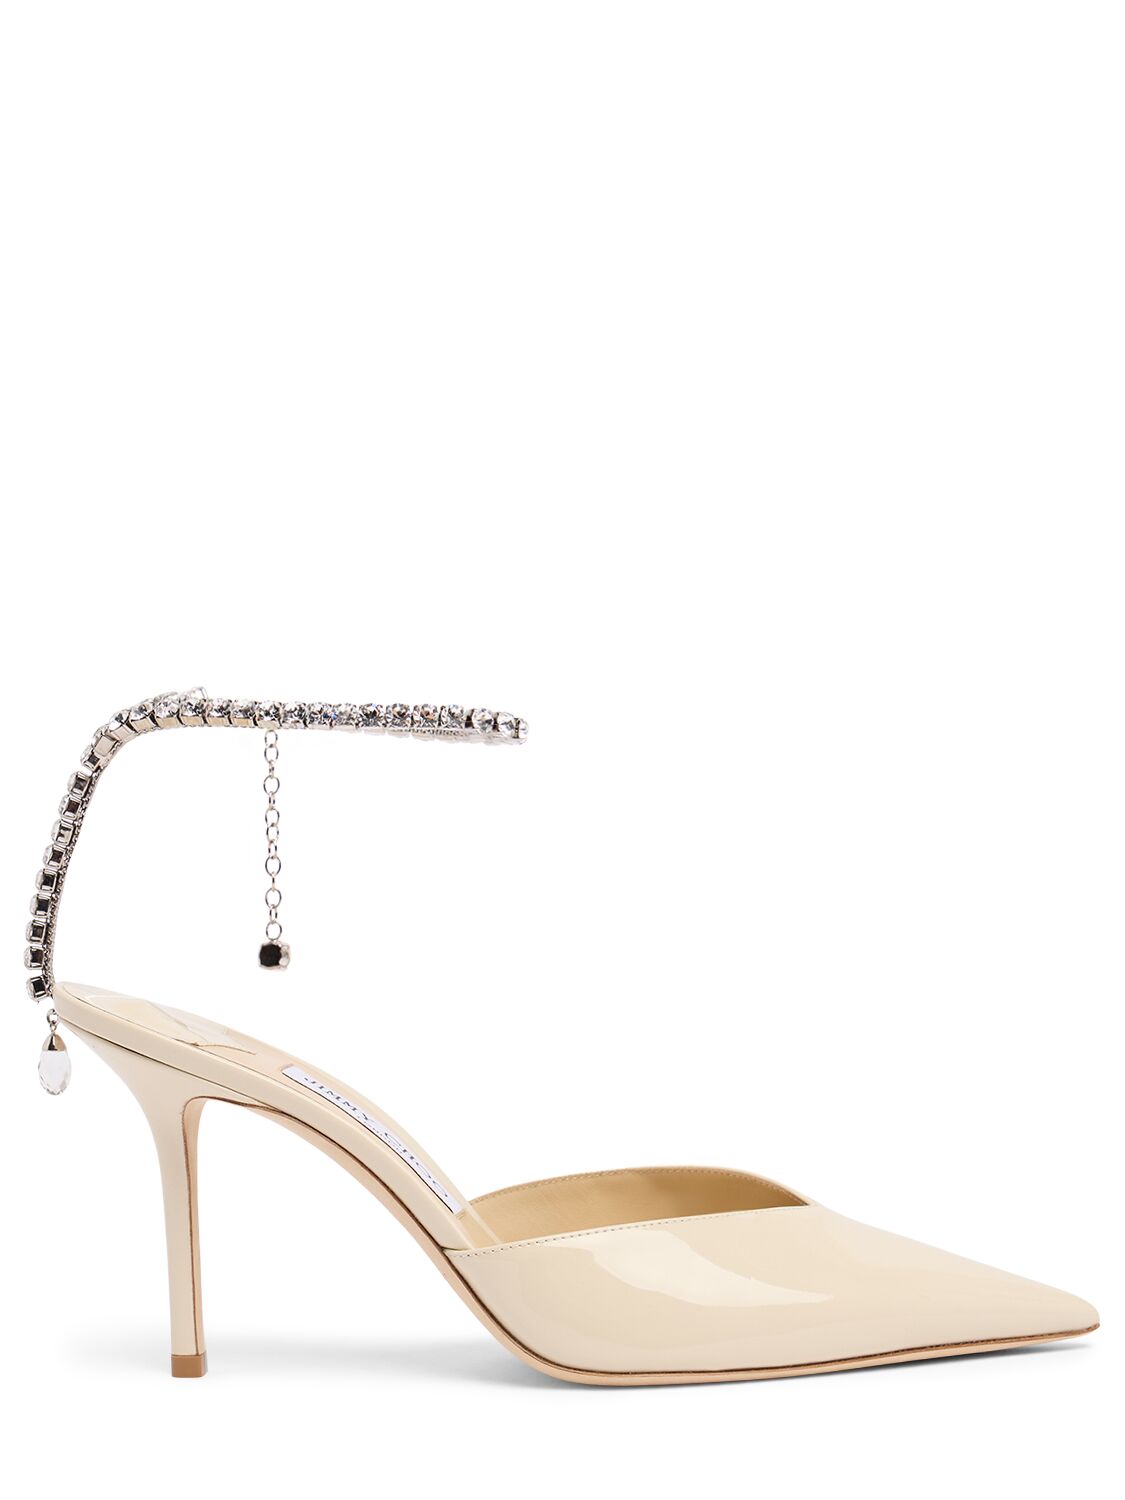 Jimmy Choo 85mm Saeda Patent Leather Pumps In Linen